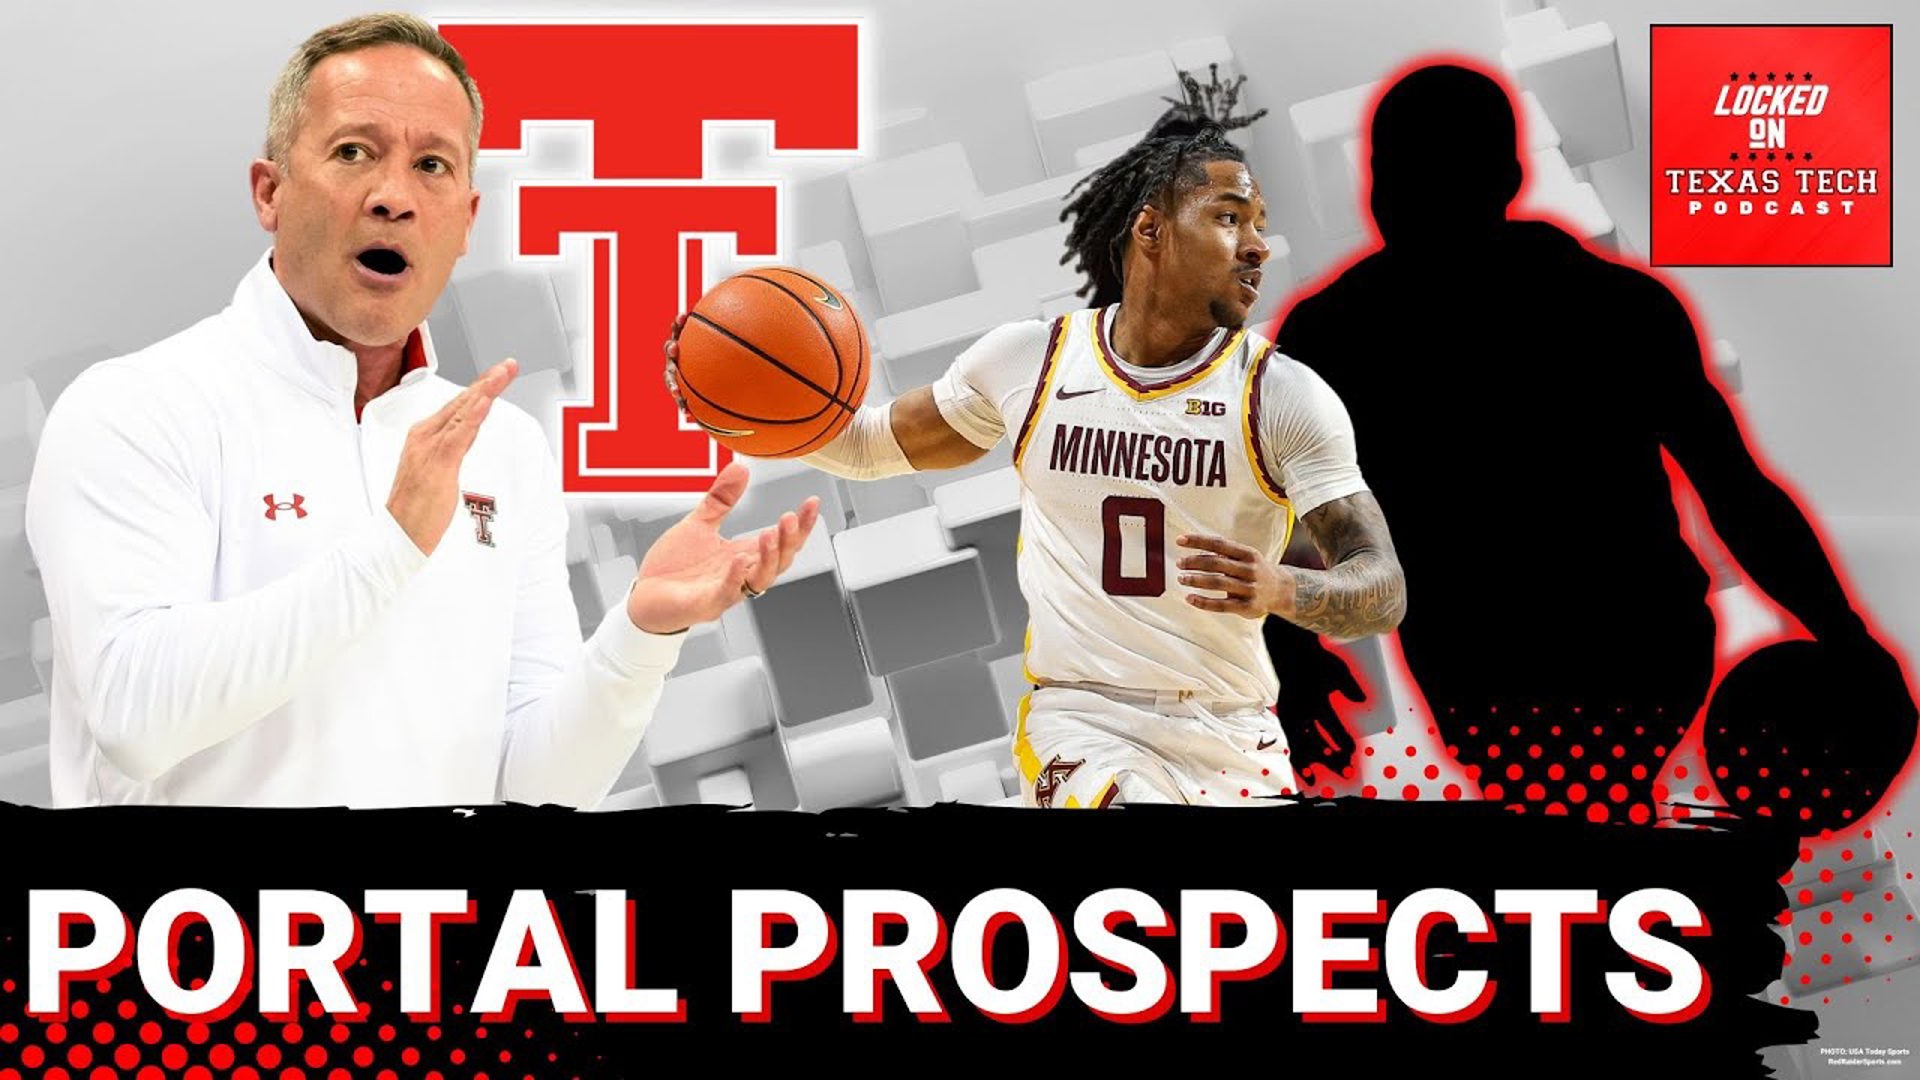 Today from Lubbock, TX, on Locked On Texas Tech:

- hoops portal visitors
- Tech v. the top shelf
- UFAs with staying power